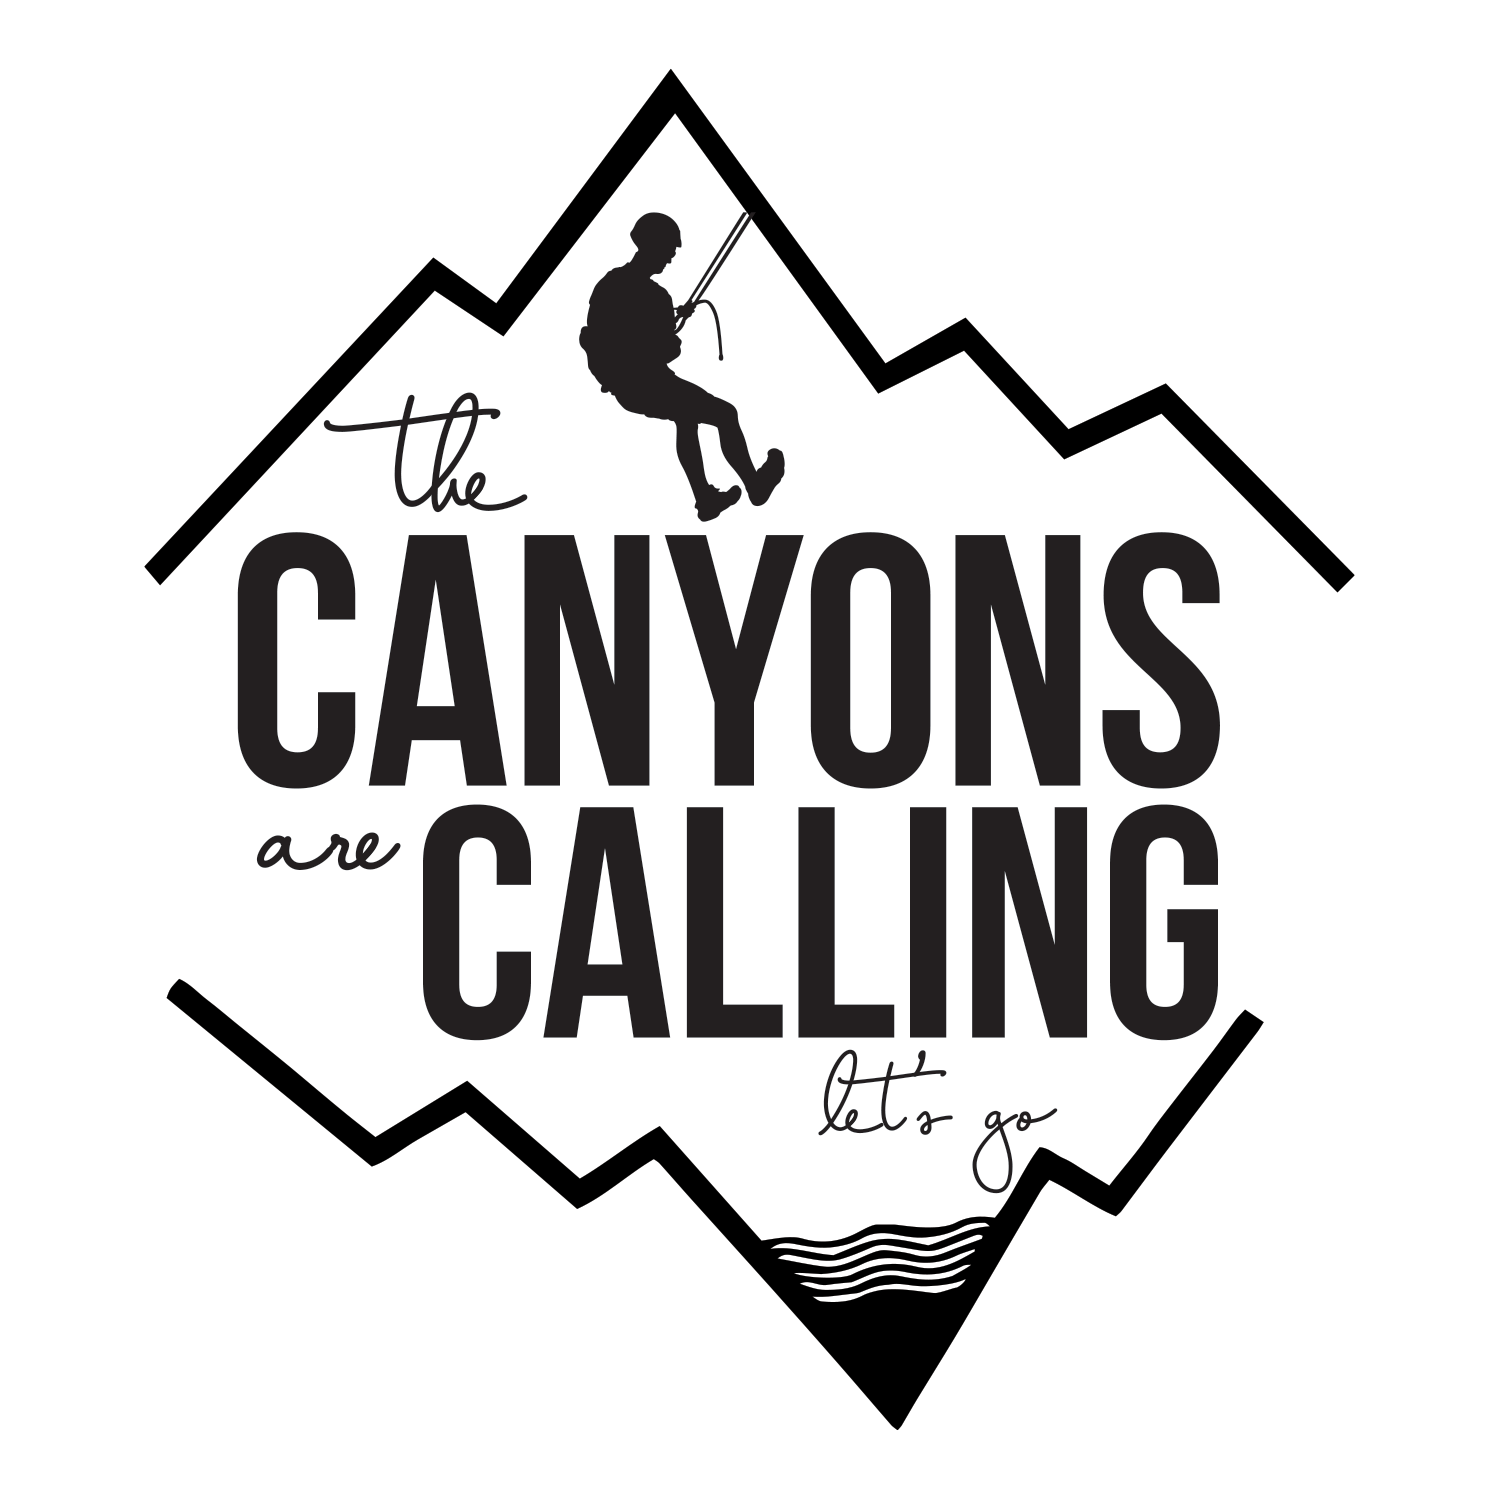 The Canyons Are Calling!